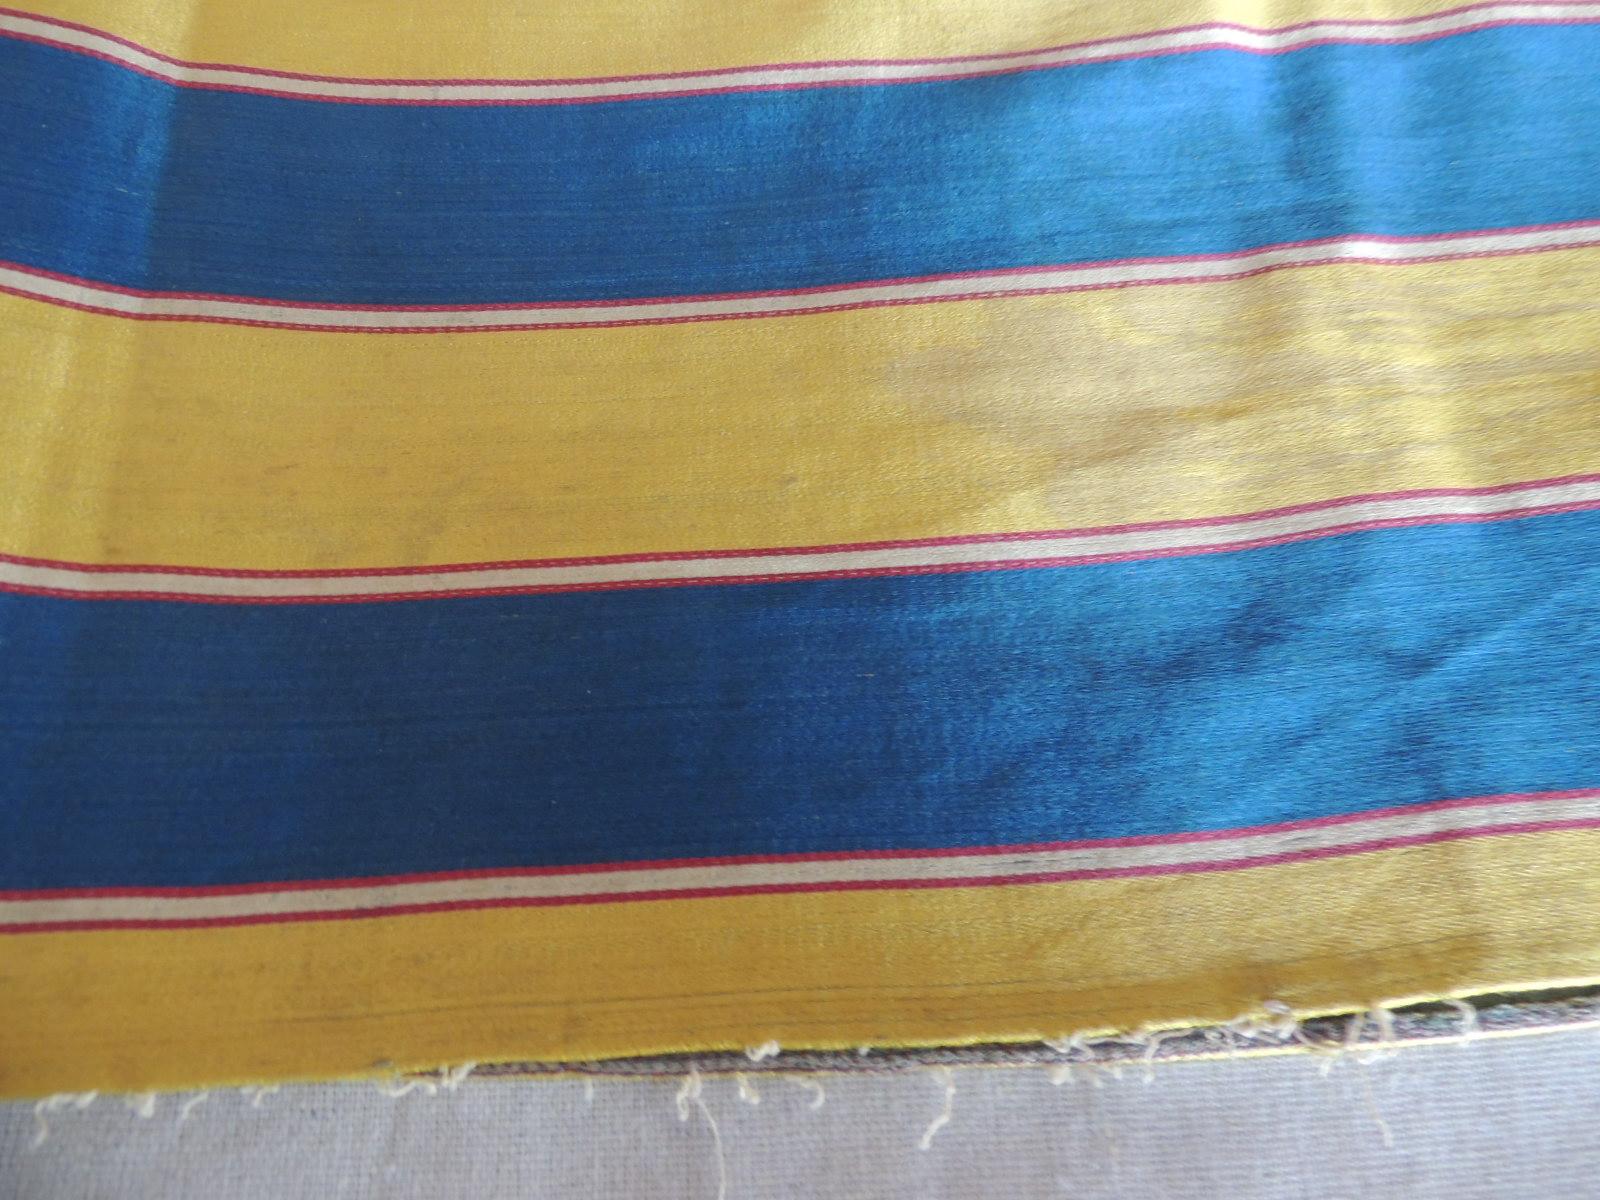 French Antique Yellow and Blue Empire Stripes Textile Panel